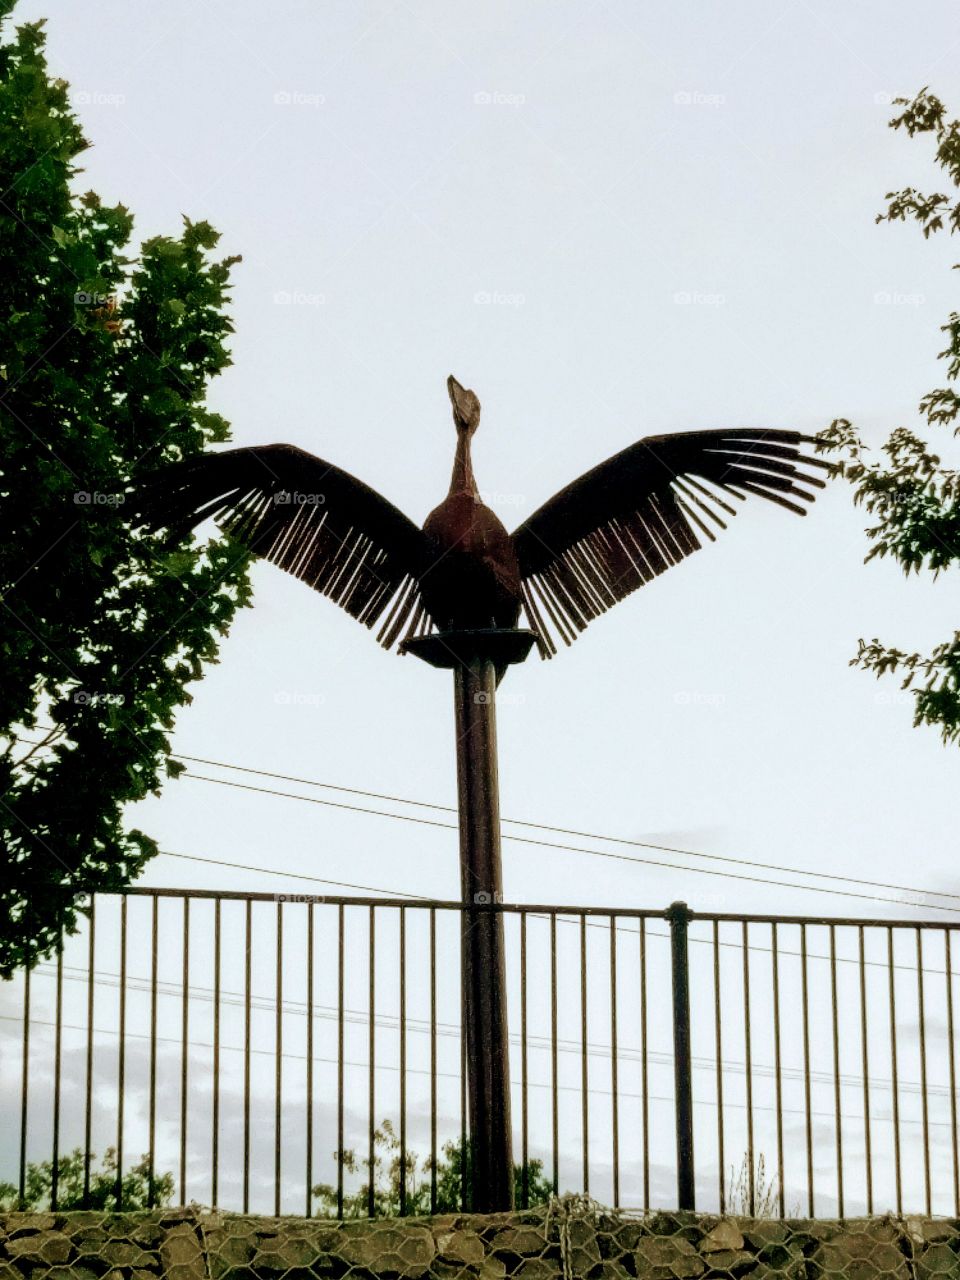 pelican Statue at the lake